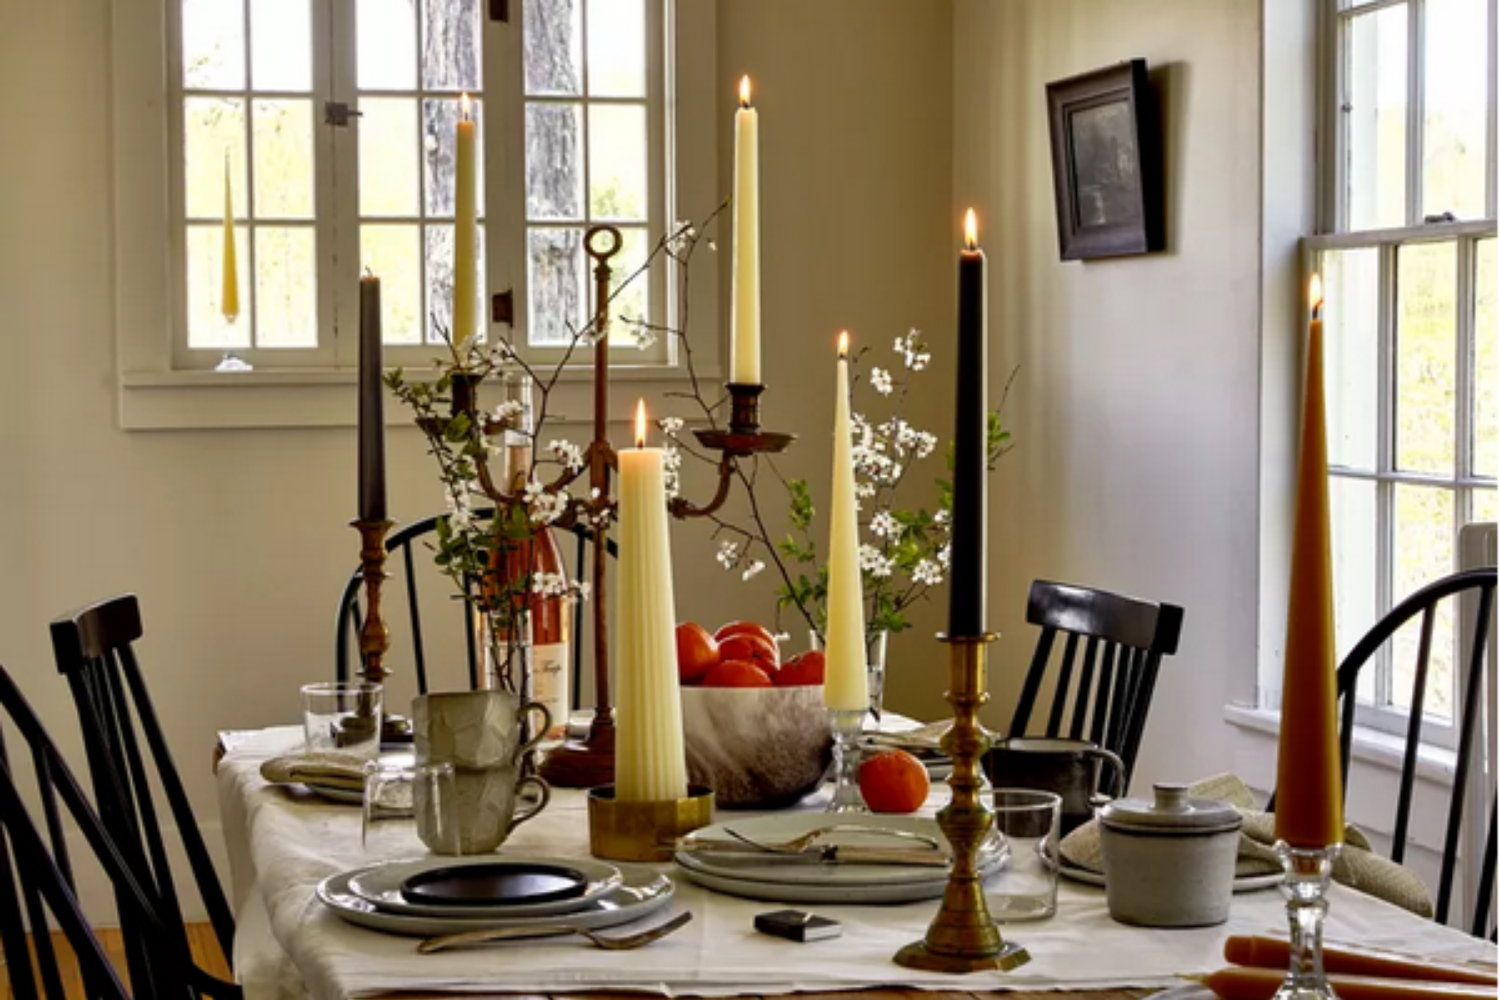 How to Set a Stunning Thanksgiving Table, According to Experts